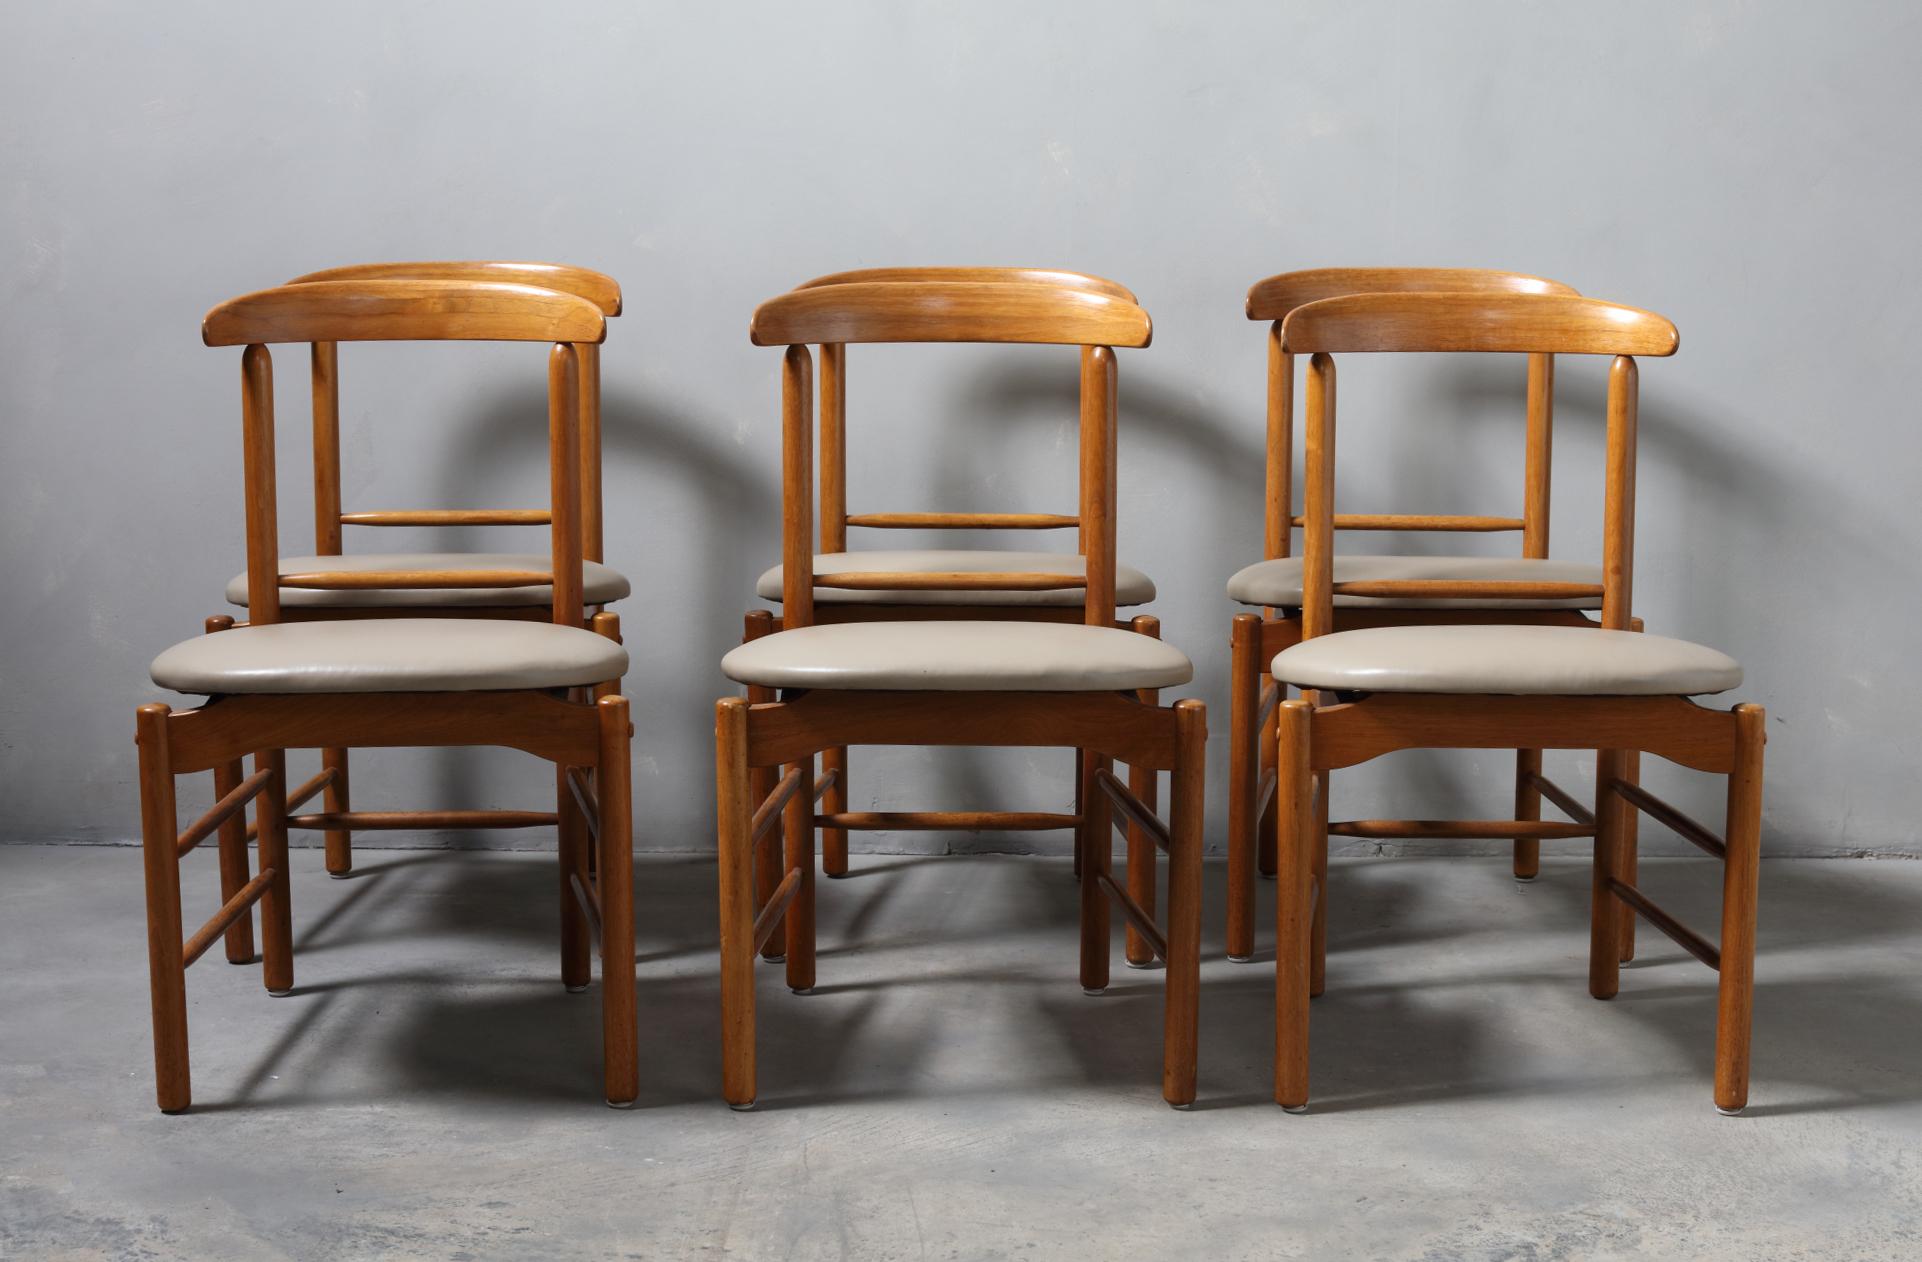 Greta Magnusson Grossman 1950s Set of Six Dining Chairs Bleached walnut, leather. Designer and architect Greta Magnusson-Grossman first gained fame in her native Sweden, where she established her store and workshop and became the first woman to